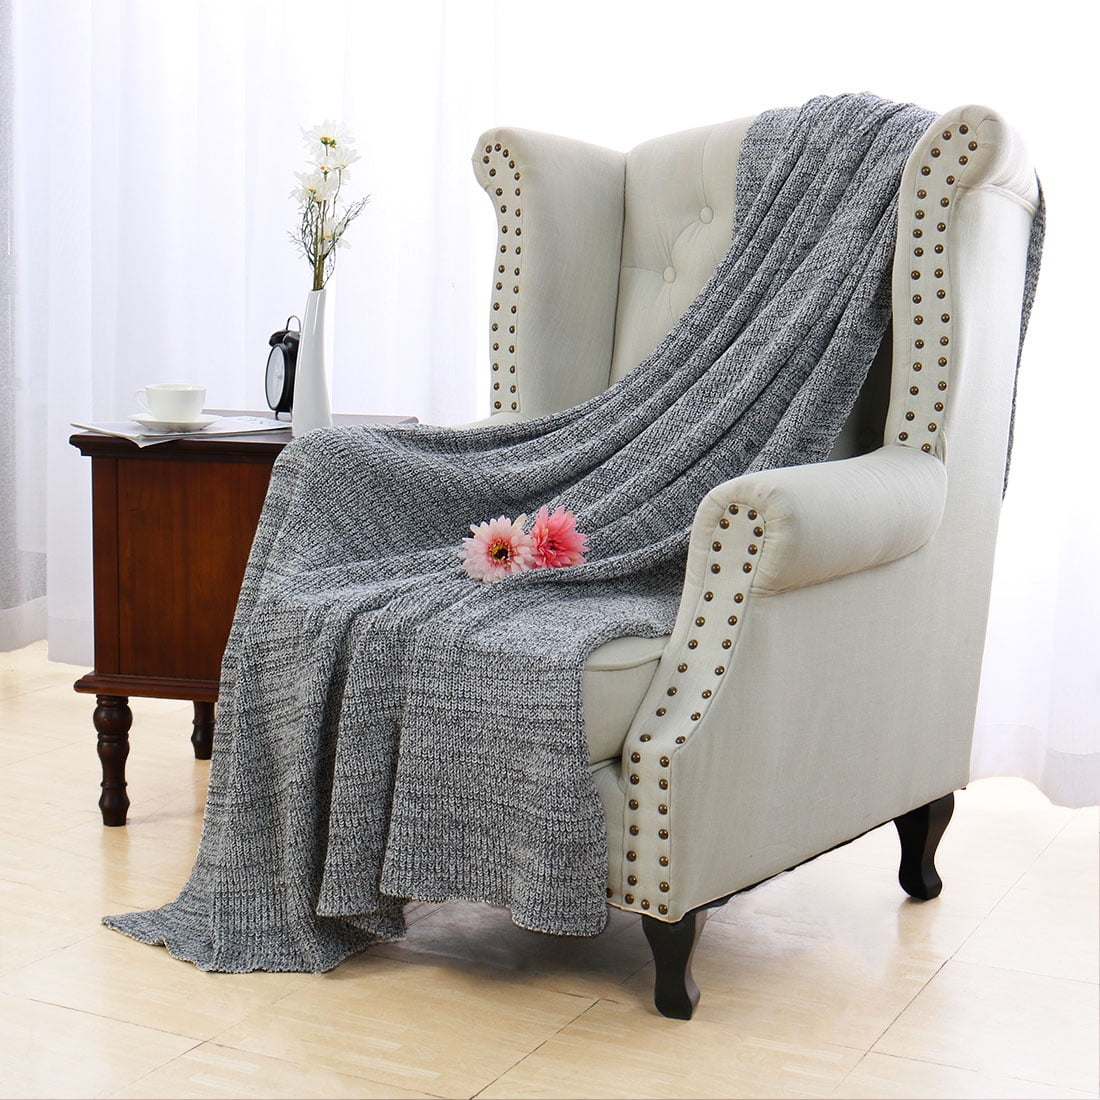 100% Cotton Knit Throw Blanket for Couch, 70 x 78